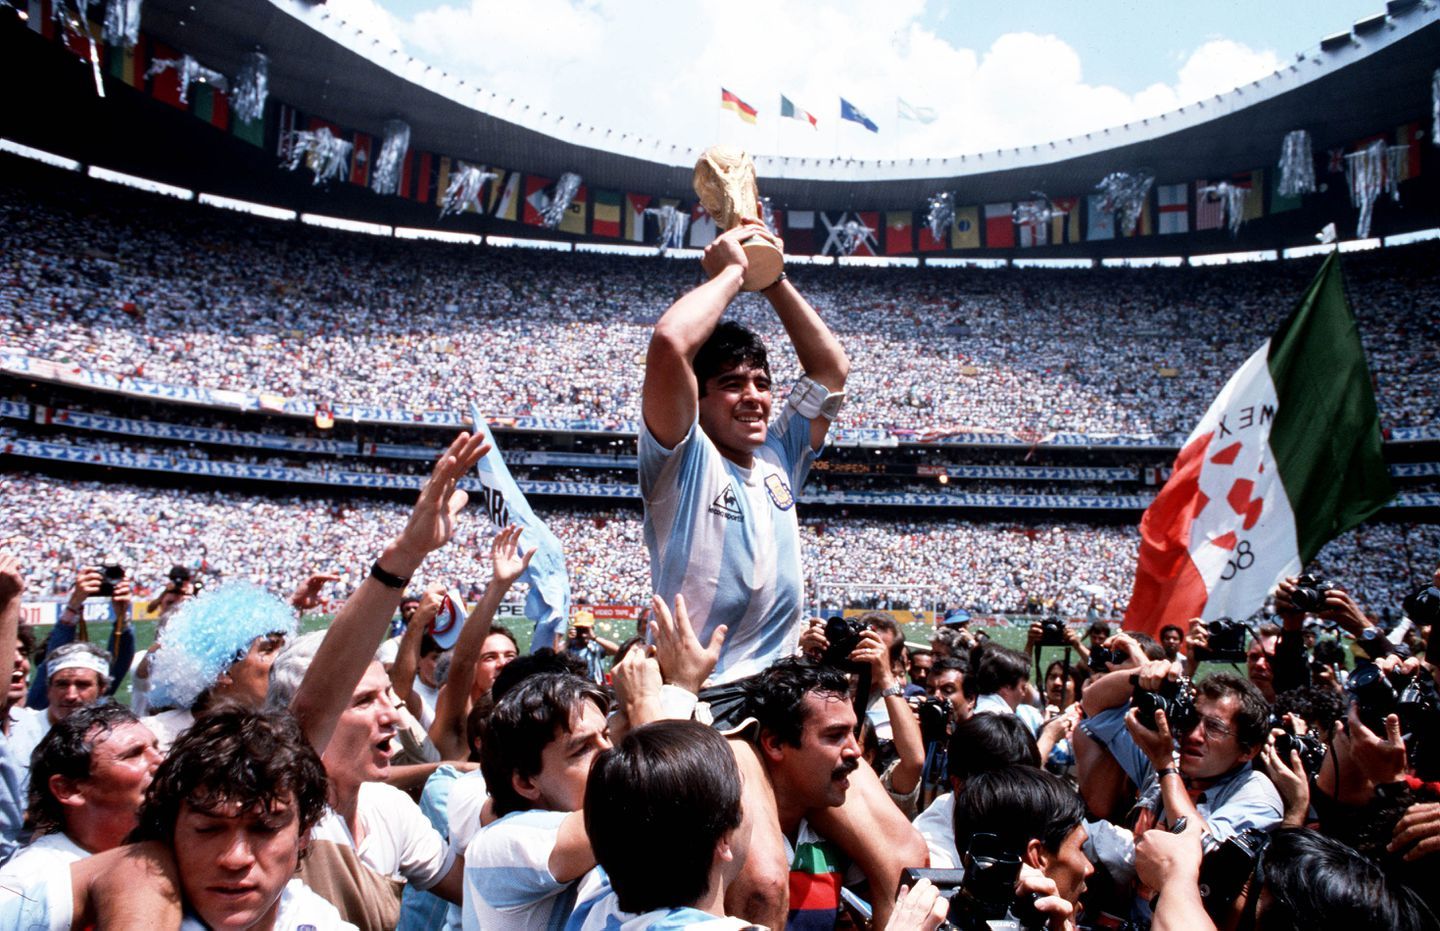 Diego Maradona, soccer legend who led Argentina to 1986 World Cup title, dead at 60 Boston Globe